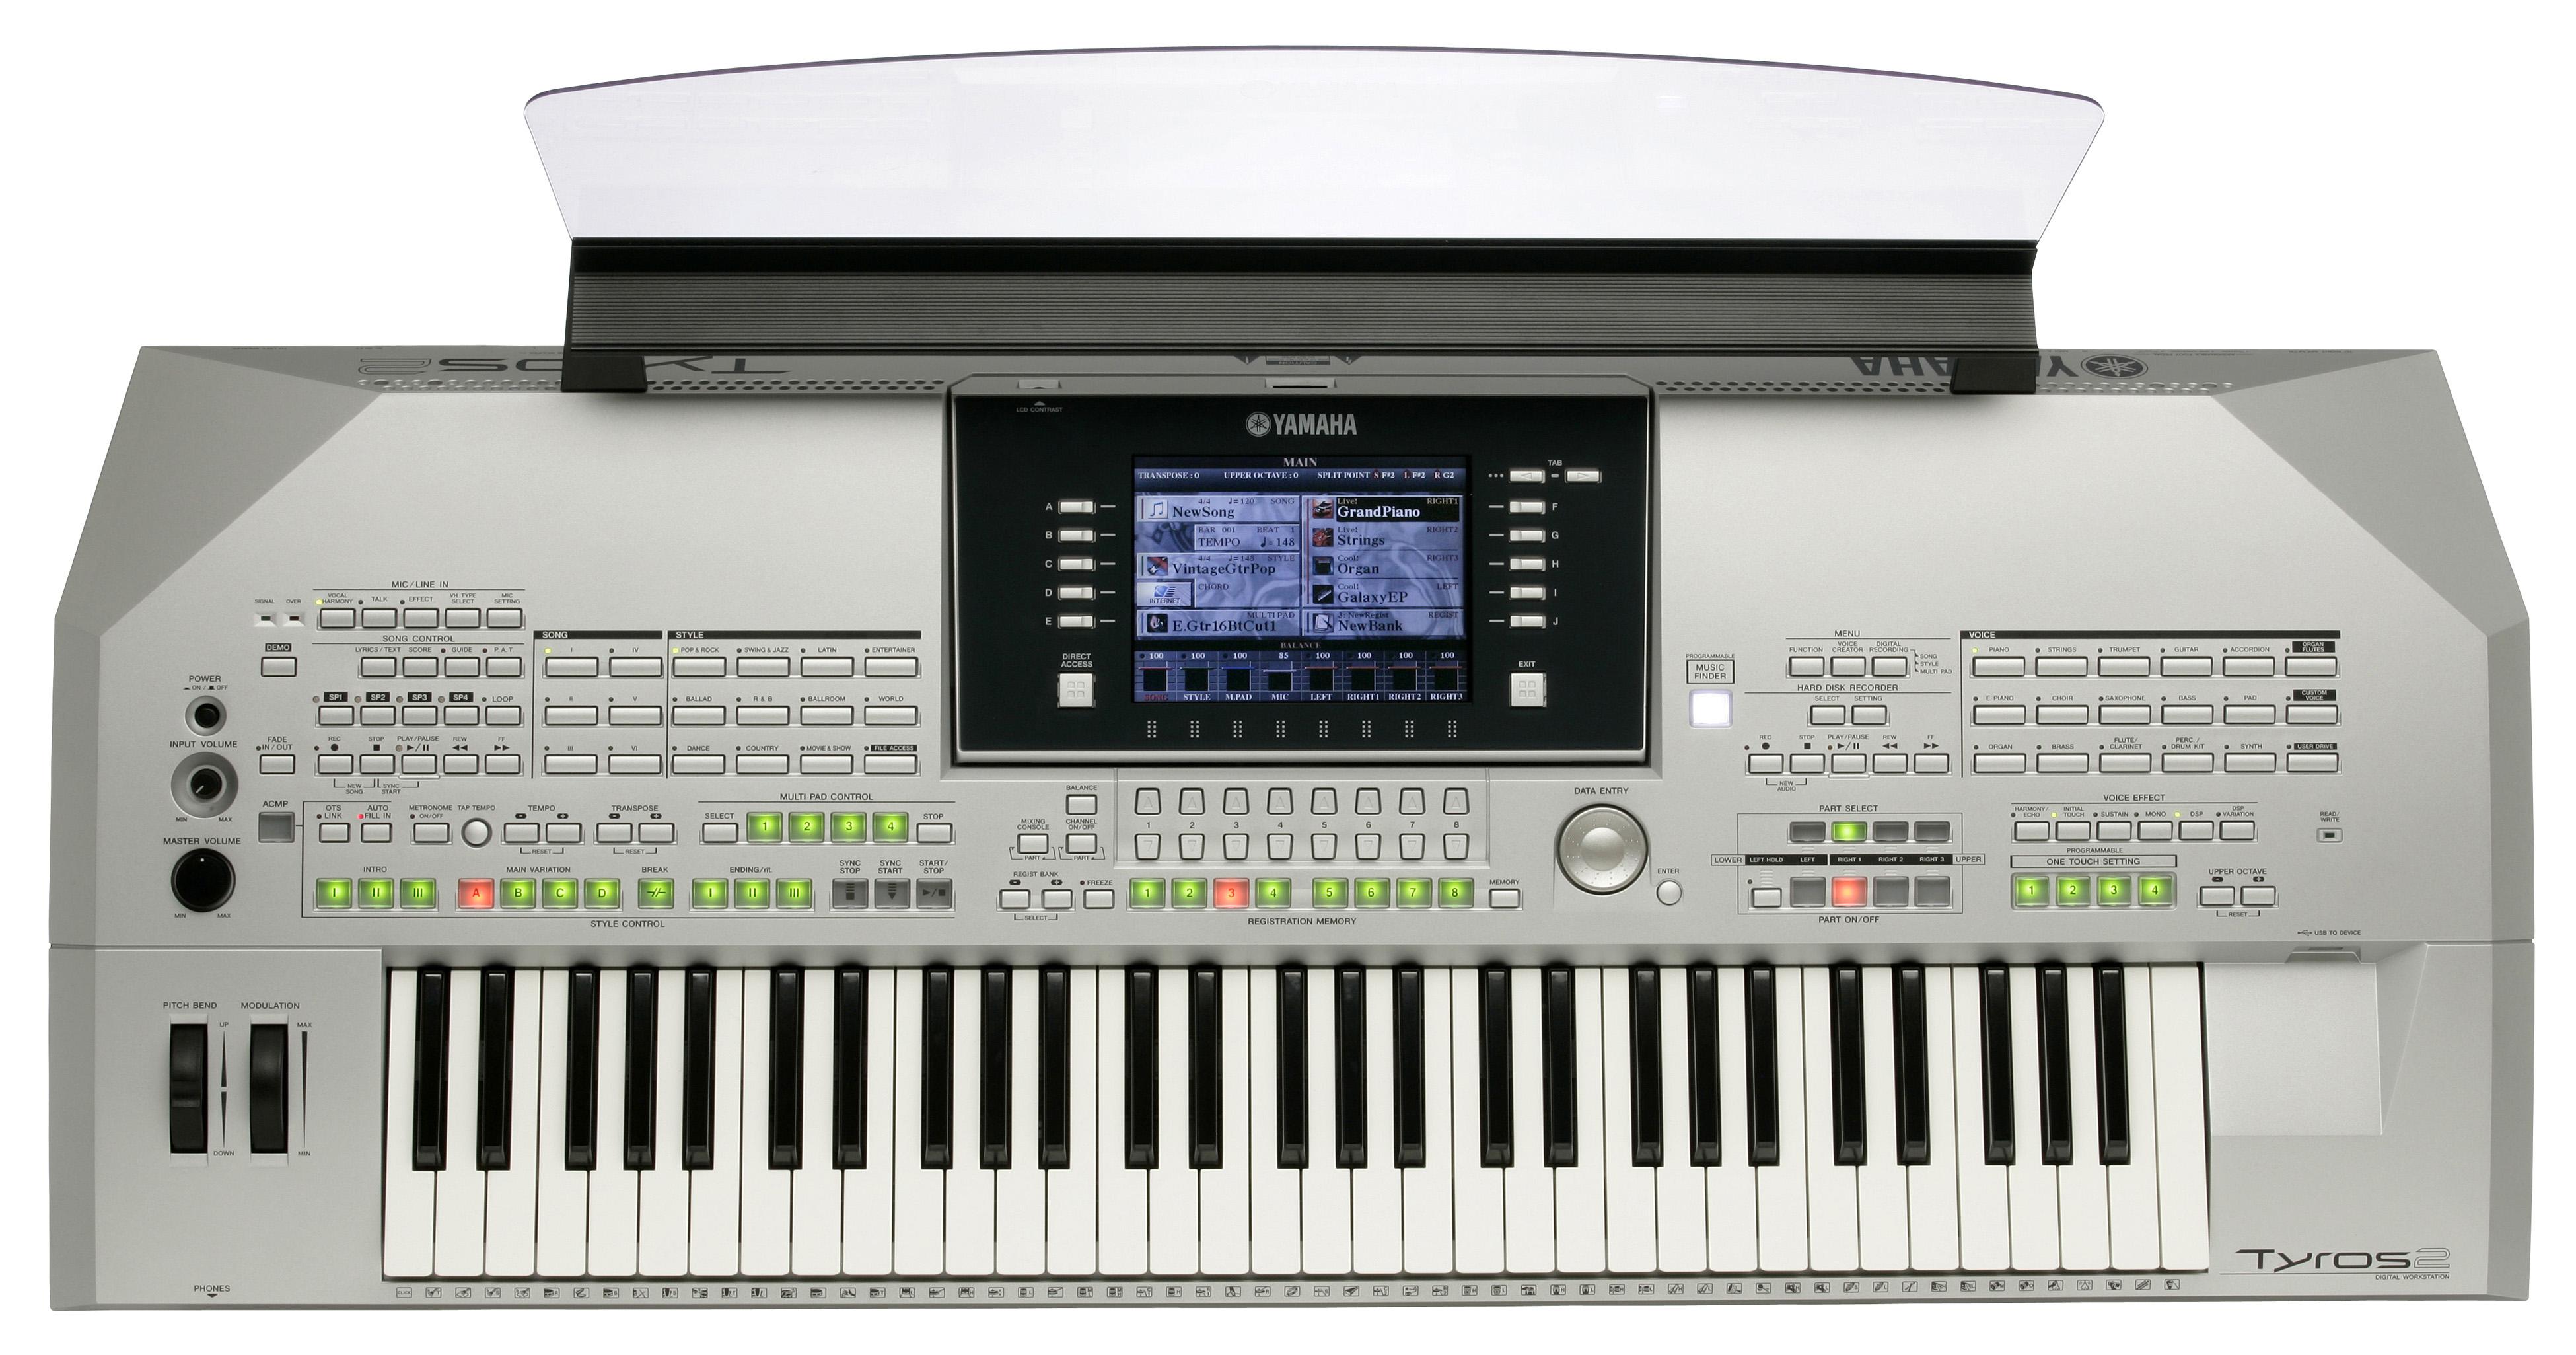 download styles for yamaha tyros 4 on the forums for free